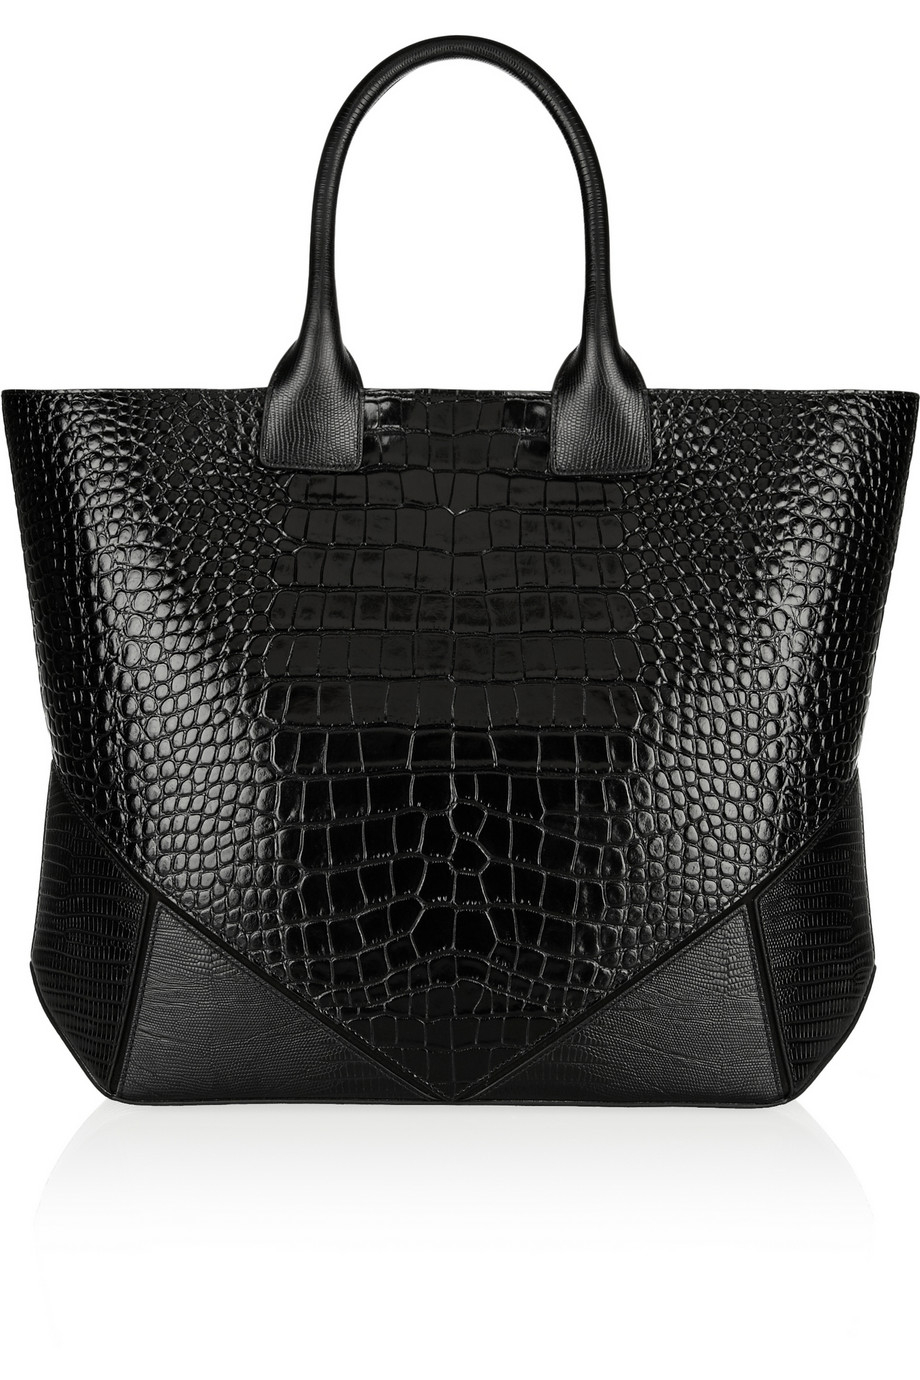 Lyst - Givenchy Easy Bag in Black Croc Embossed Leather in Black